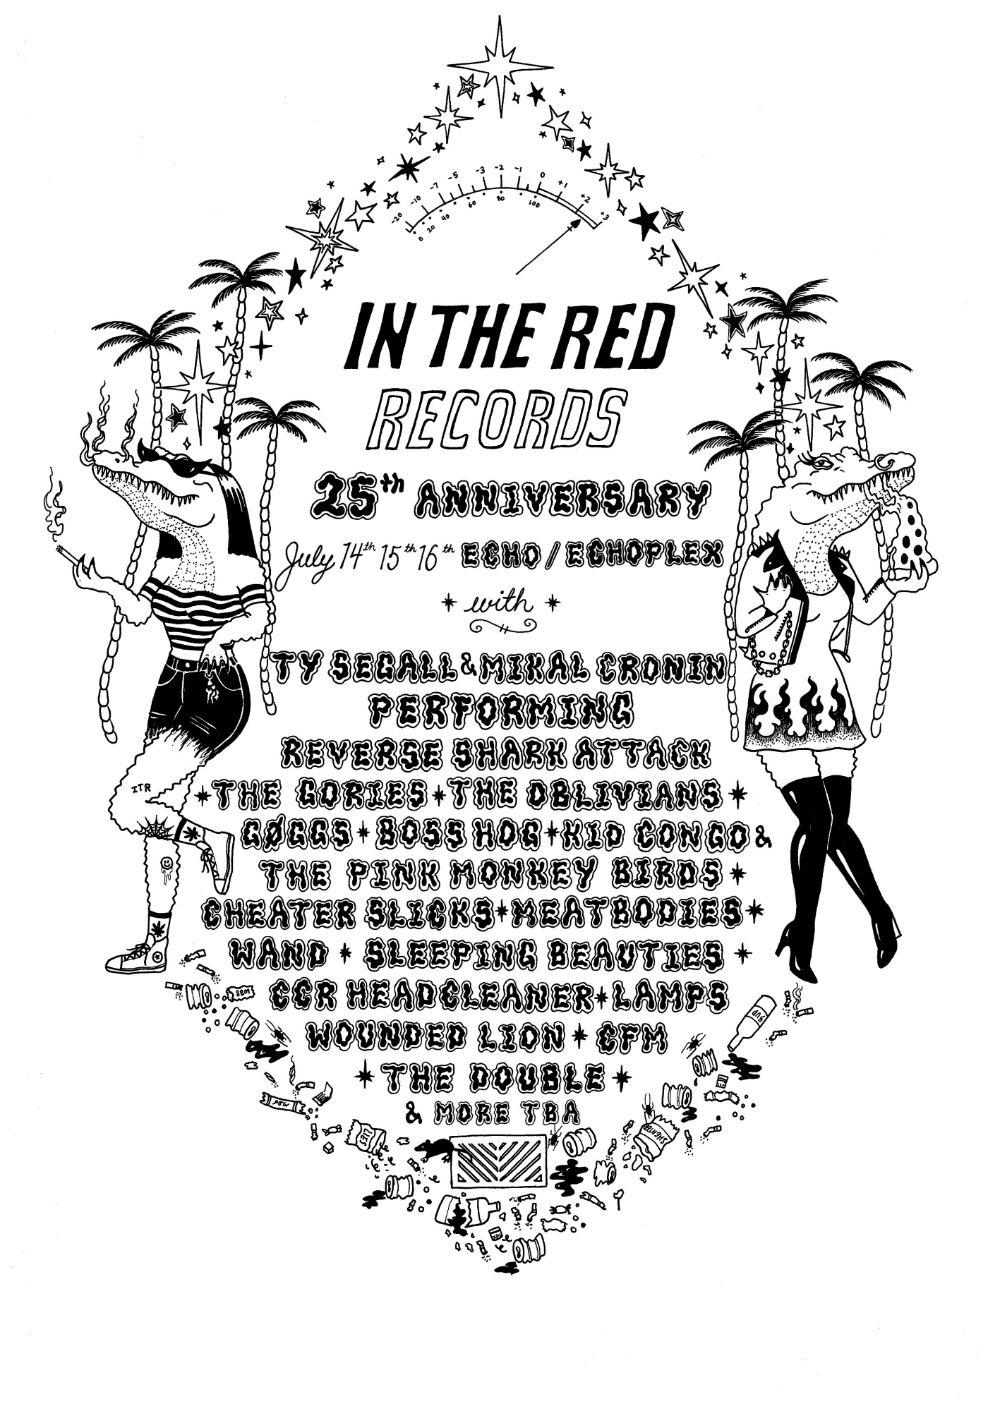 In The Red Records Anniversary flyer